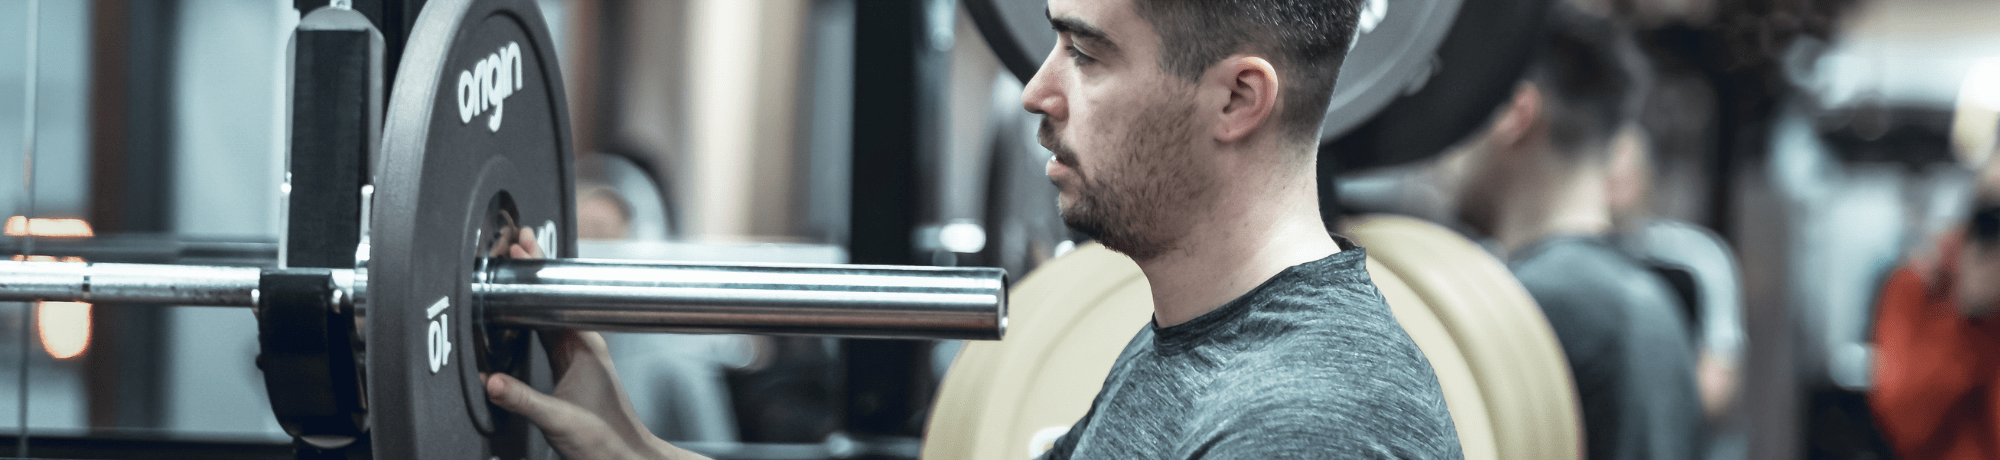 Man Loading Barbell With Weights